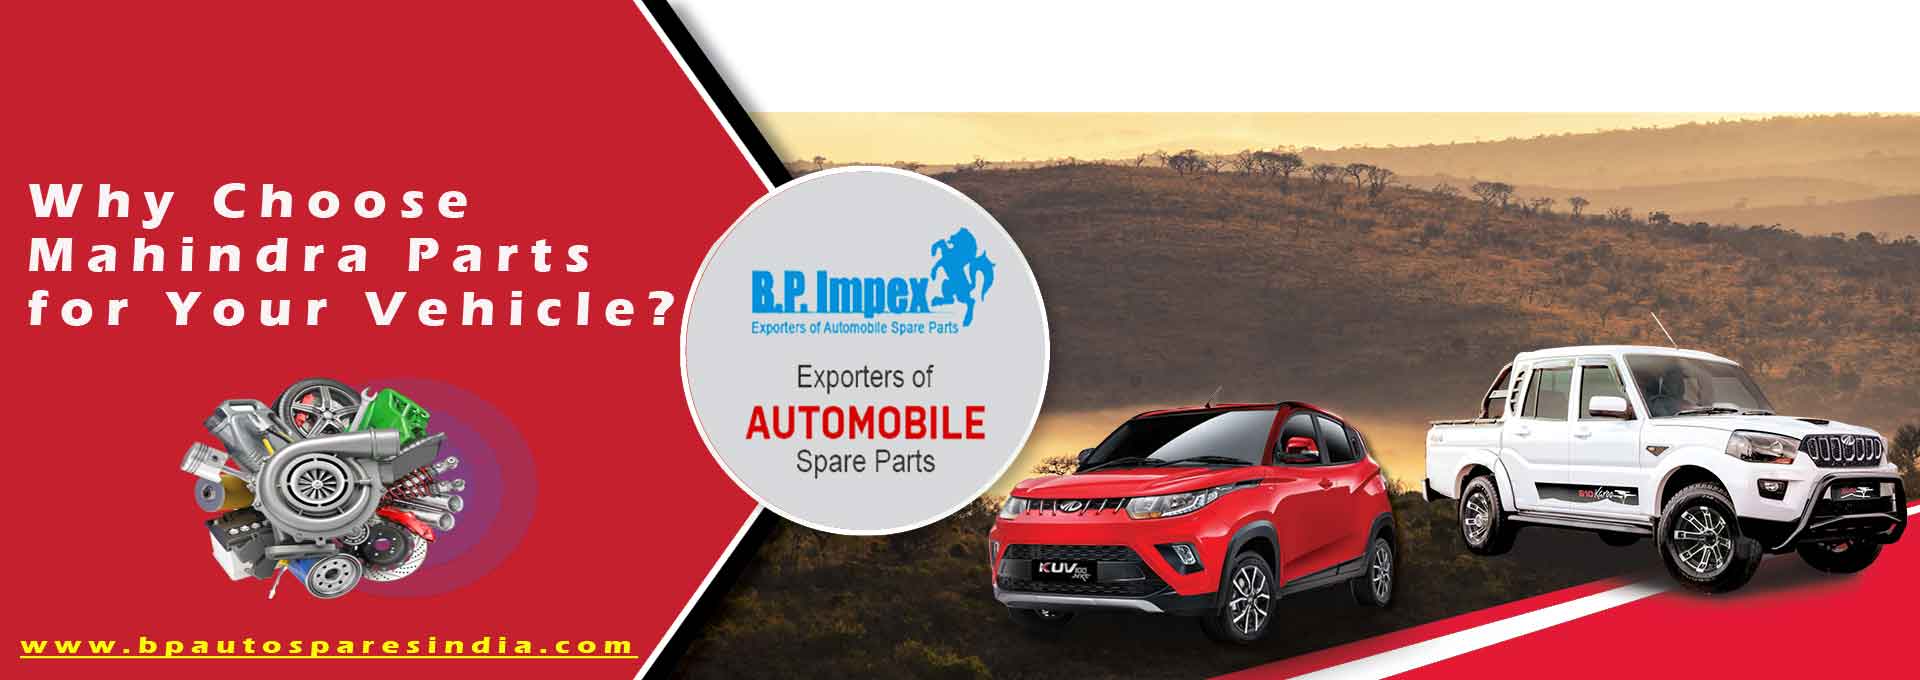 Why Choose Mahindra Parts for Your Vehicle?